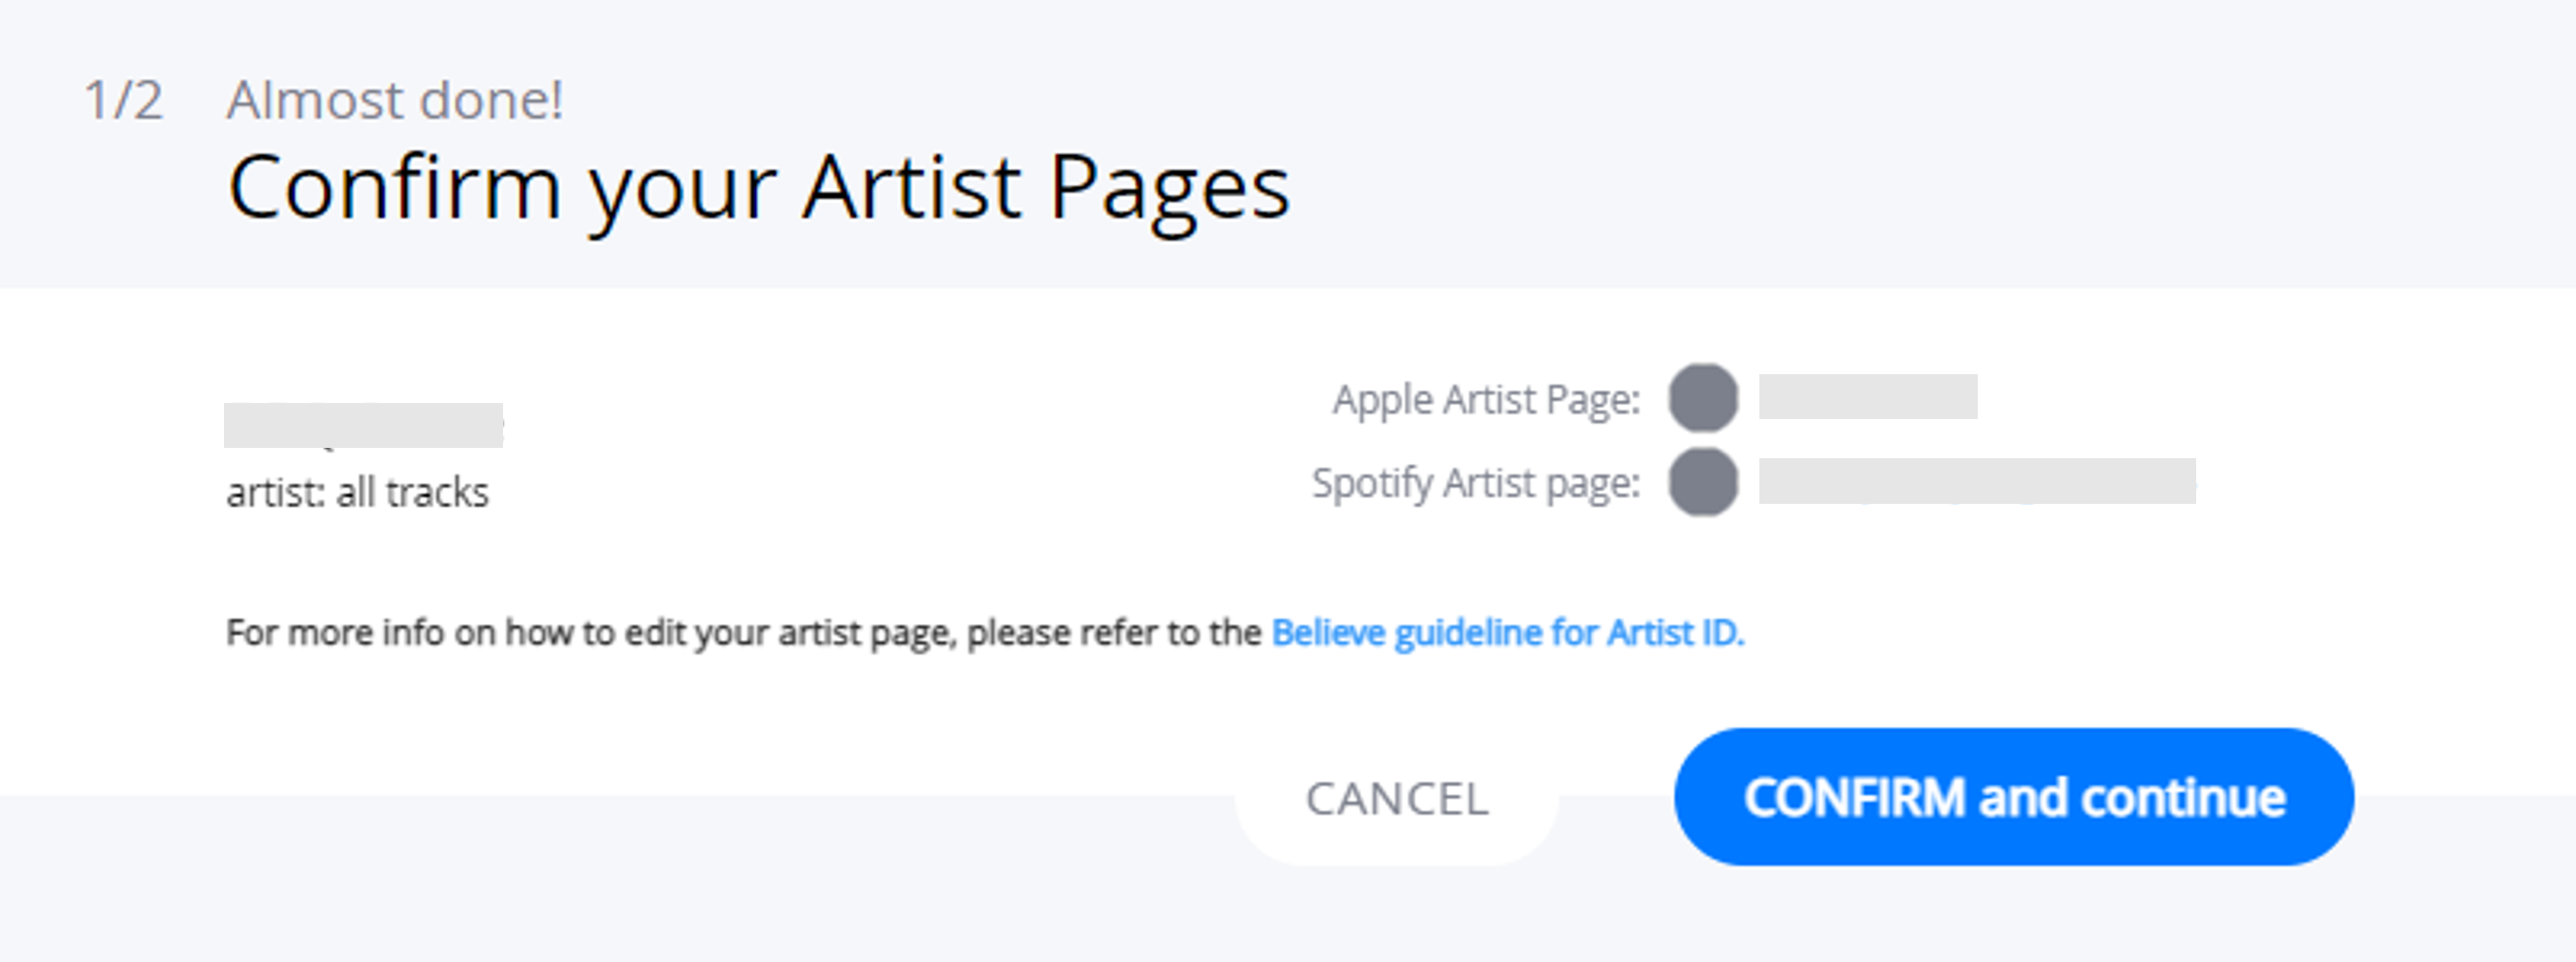 Confirm_your_Artist_Pages.png